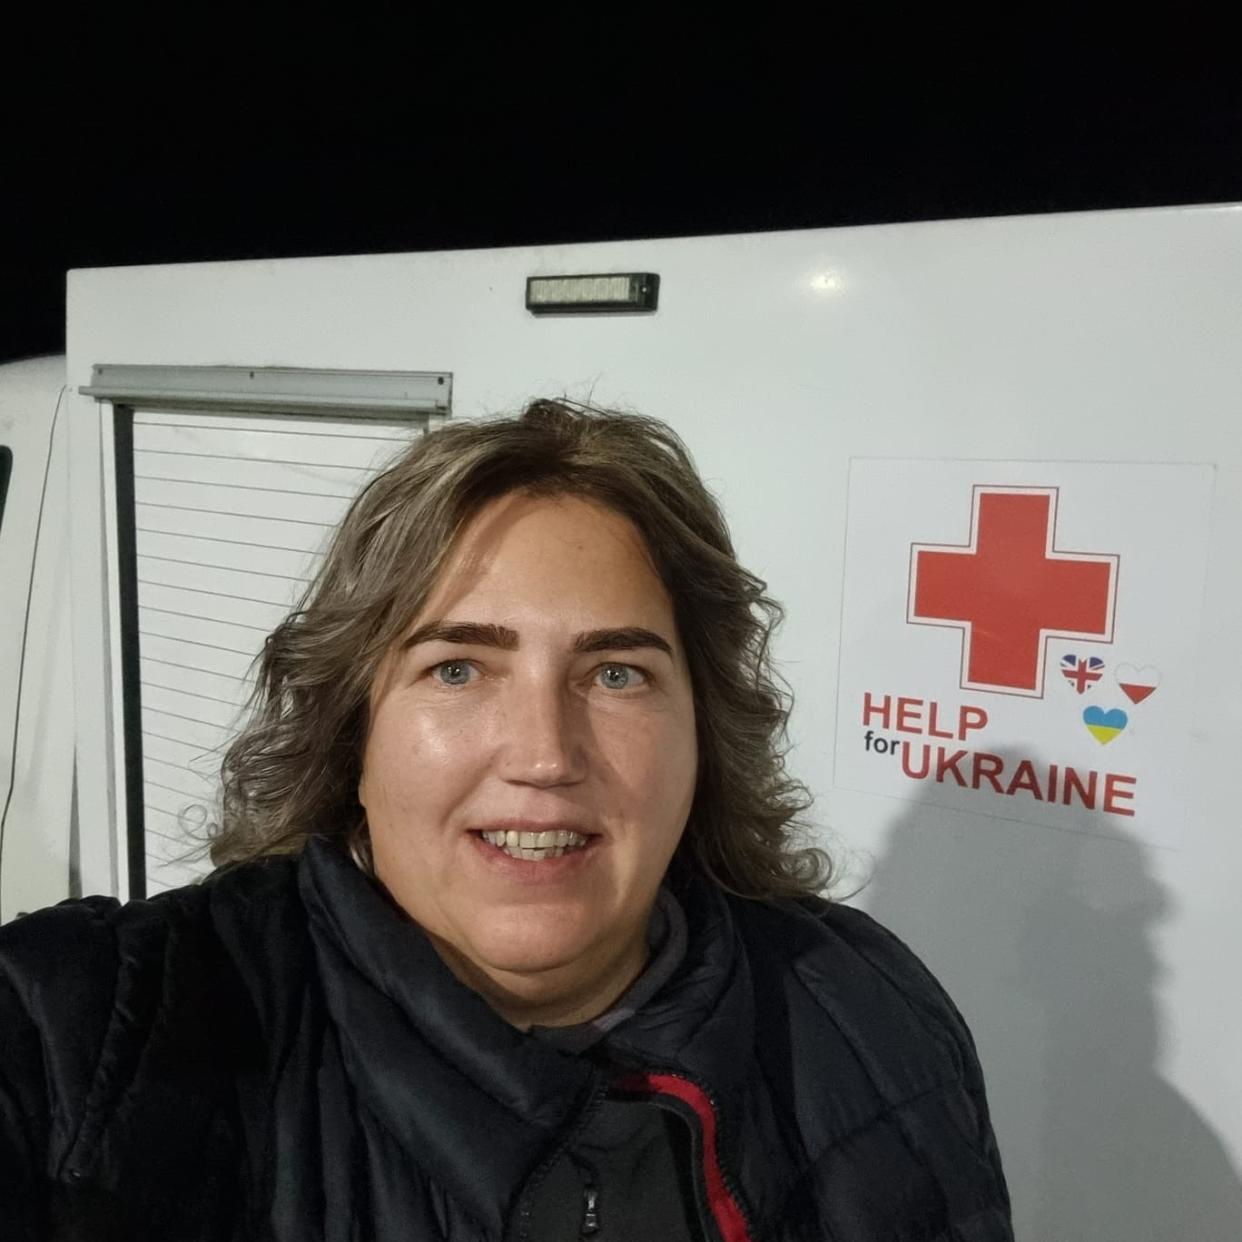 Woman smiling at the camera and standing in front of an ambulance